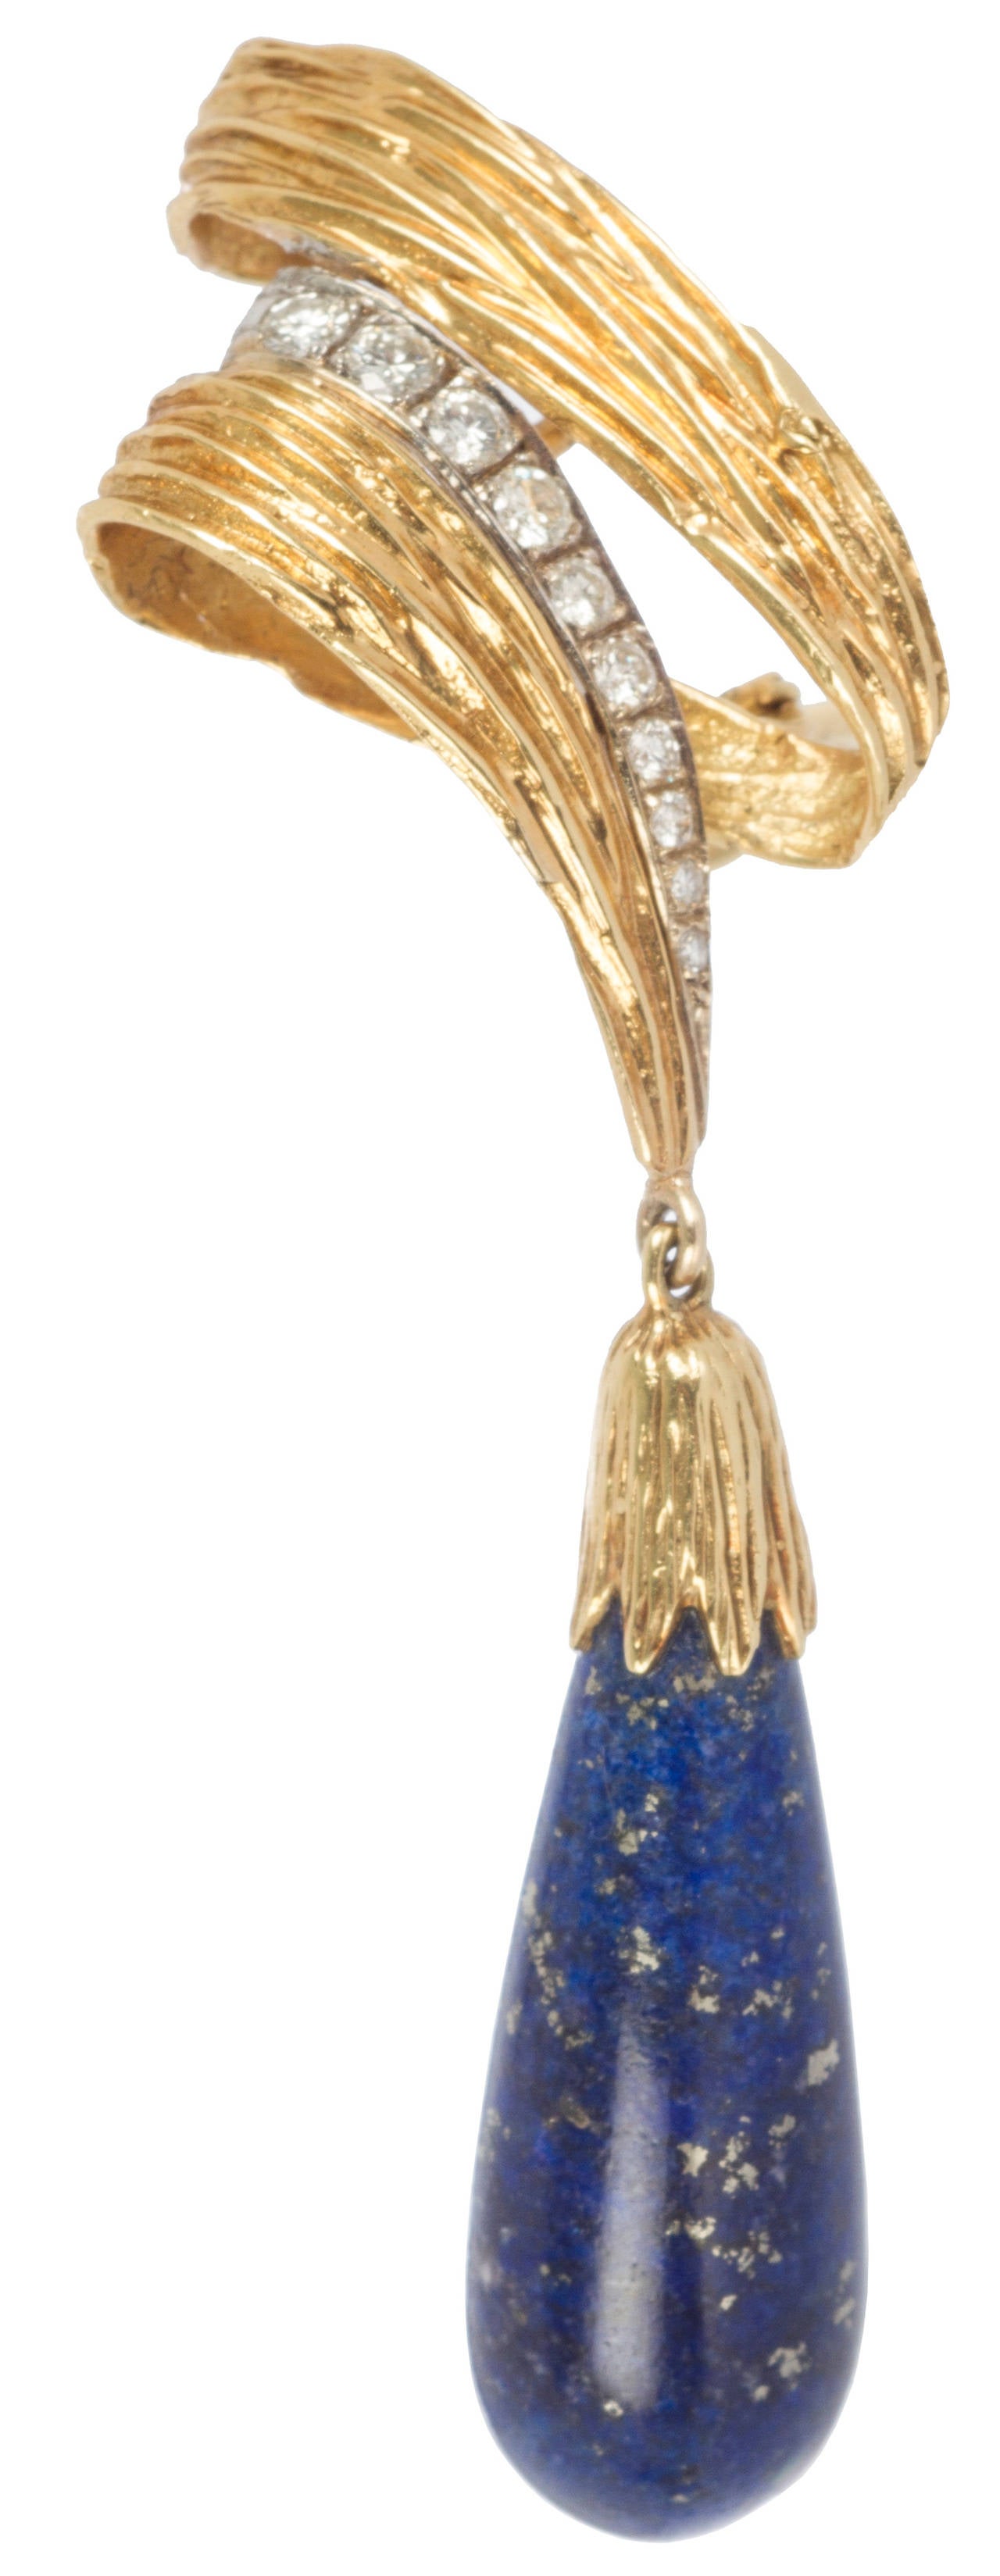 These chic earrings look great on.  The diamonds are clear and bright and the lapis is flecked with gold.  The backs are omega backed and can be made into pierced as well.